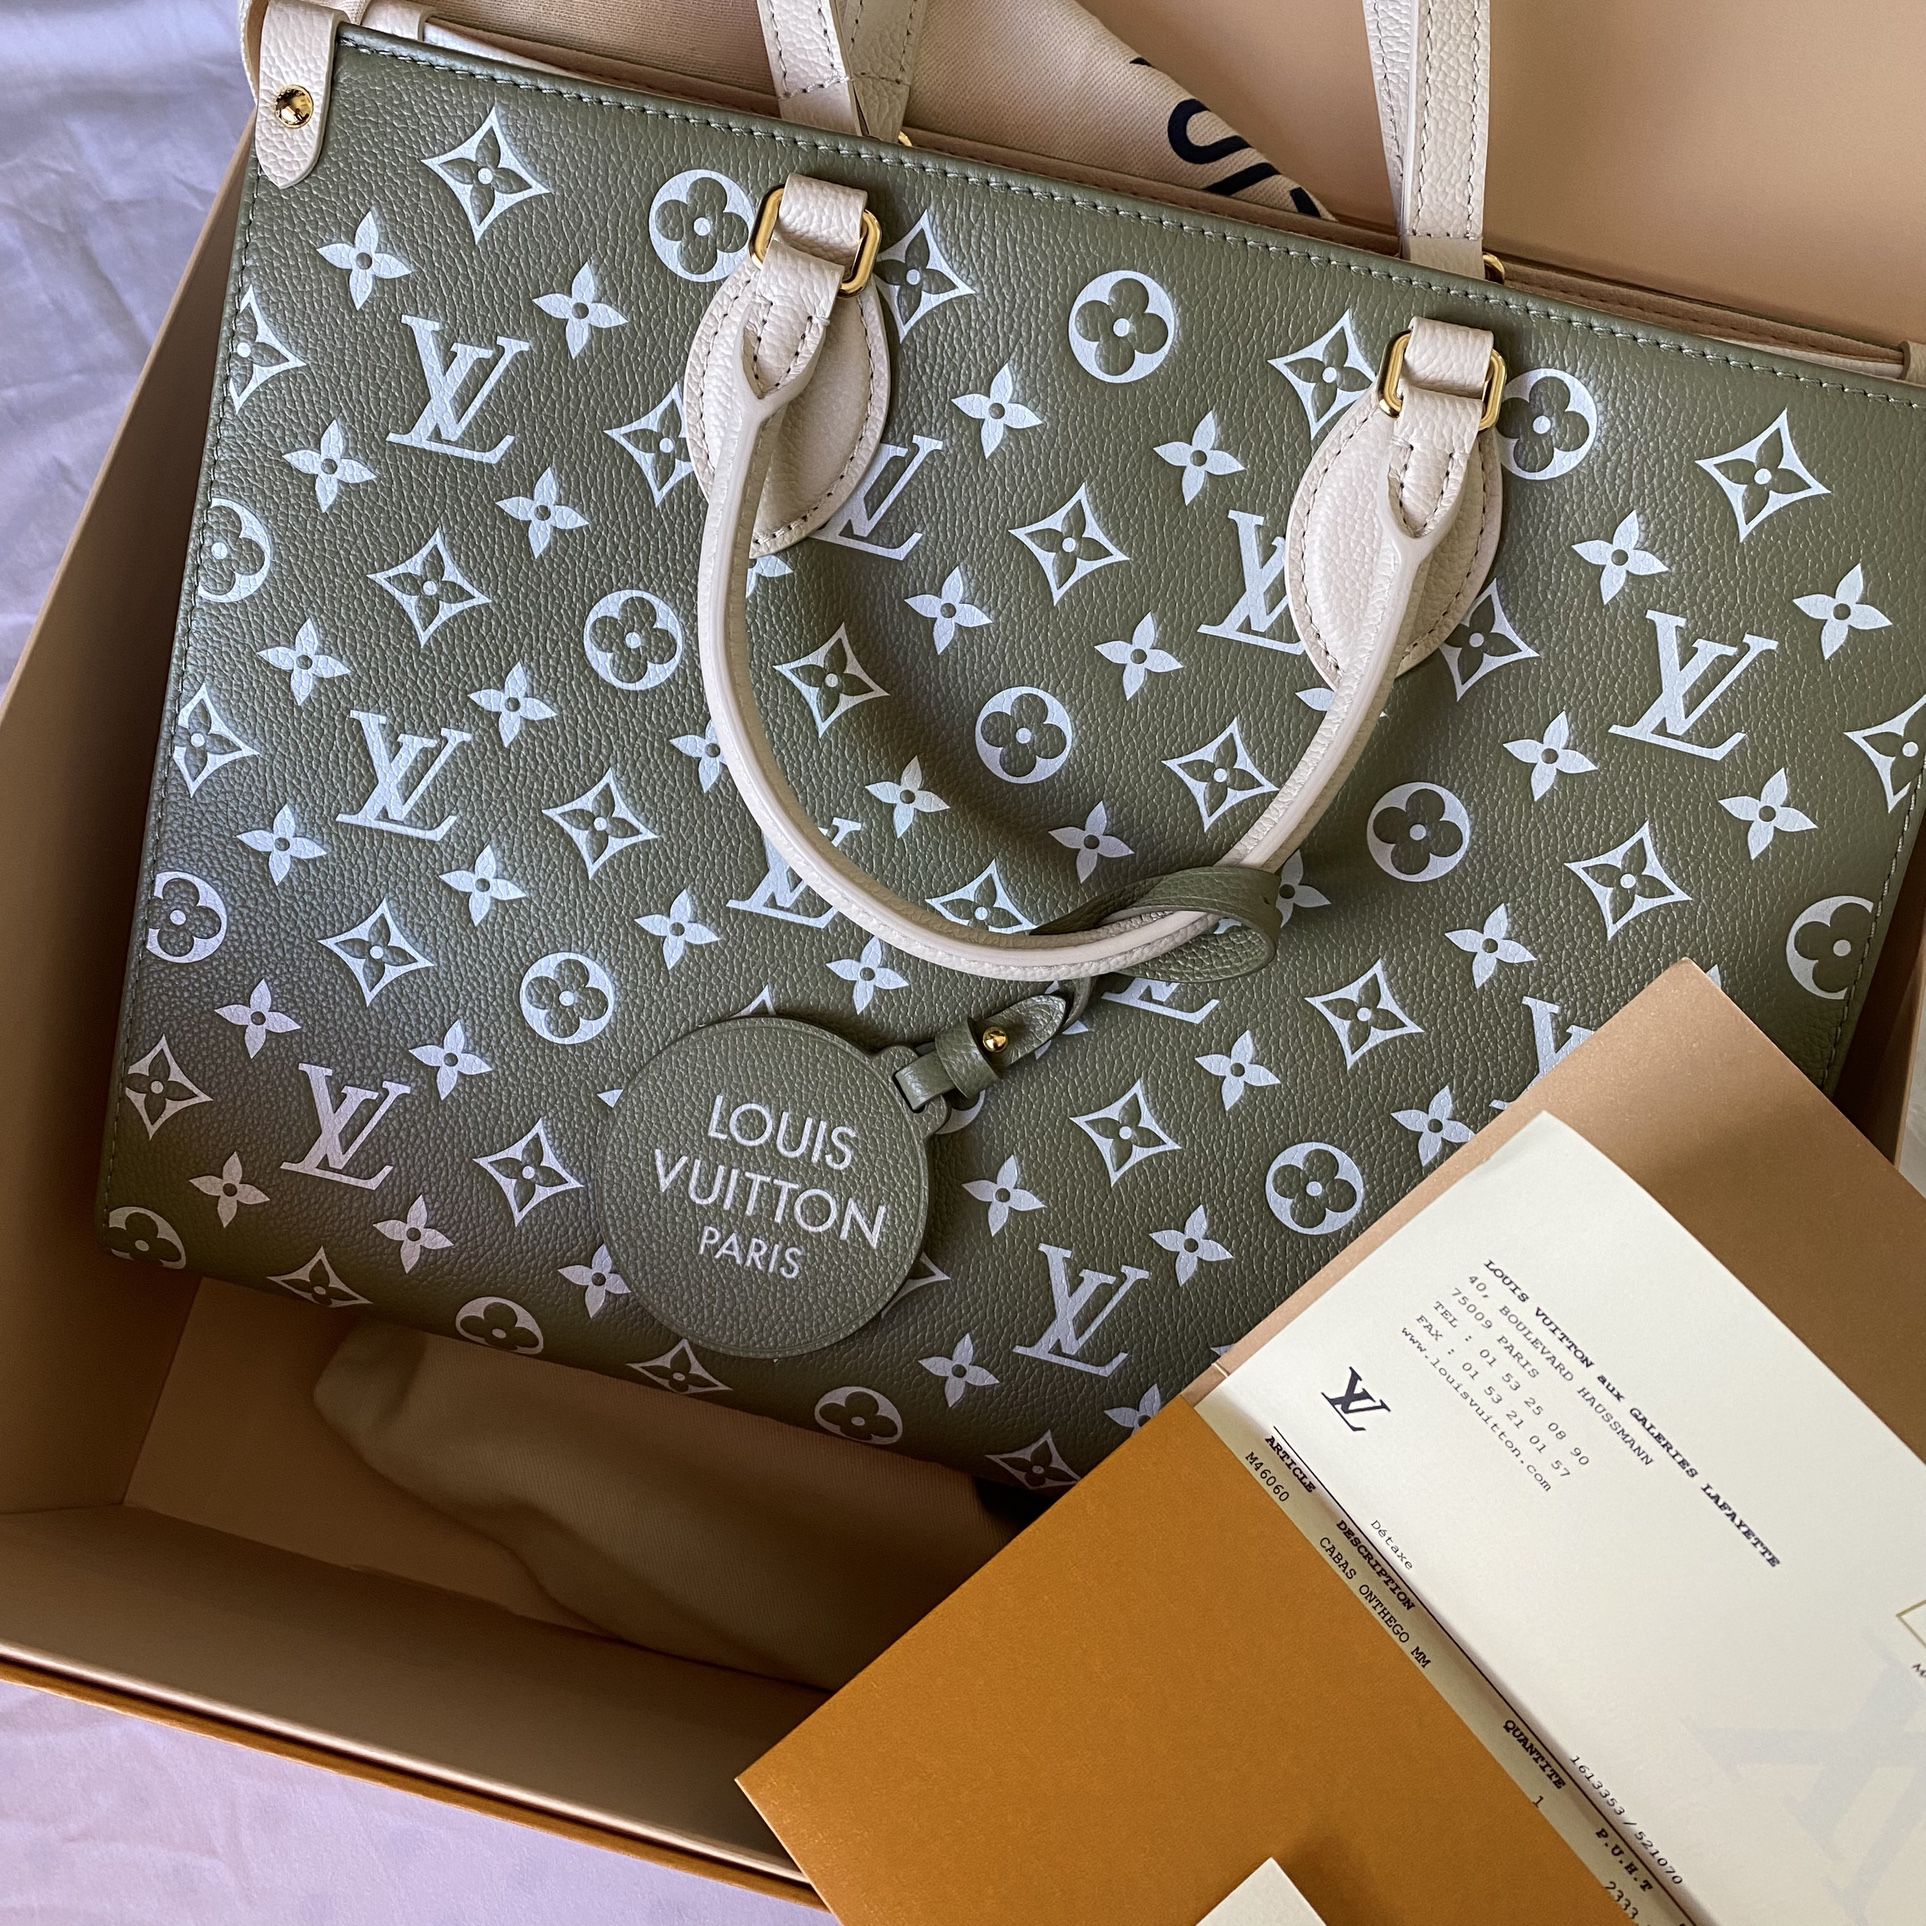 Louis Vuitton Neverfull Bags for sale in Miami, Florida